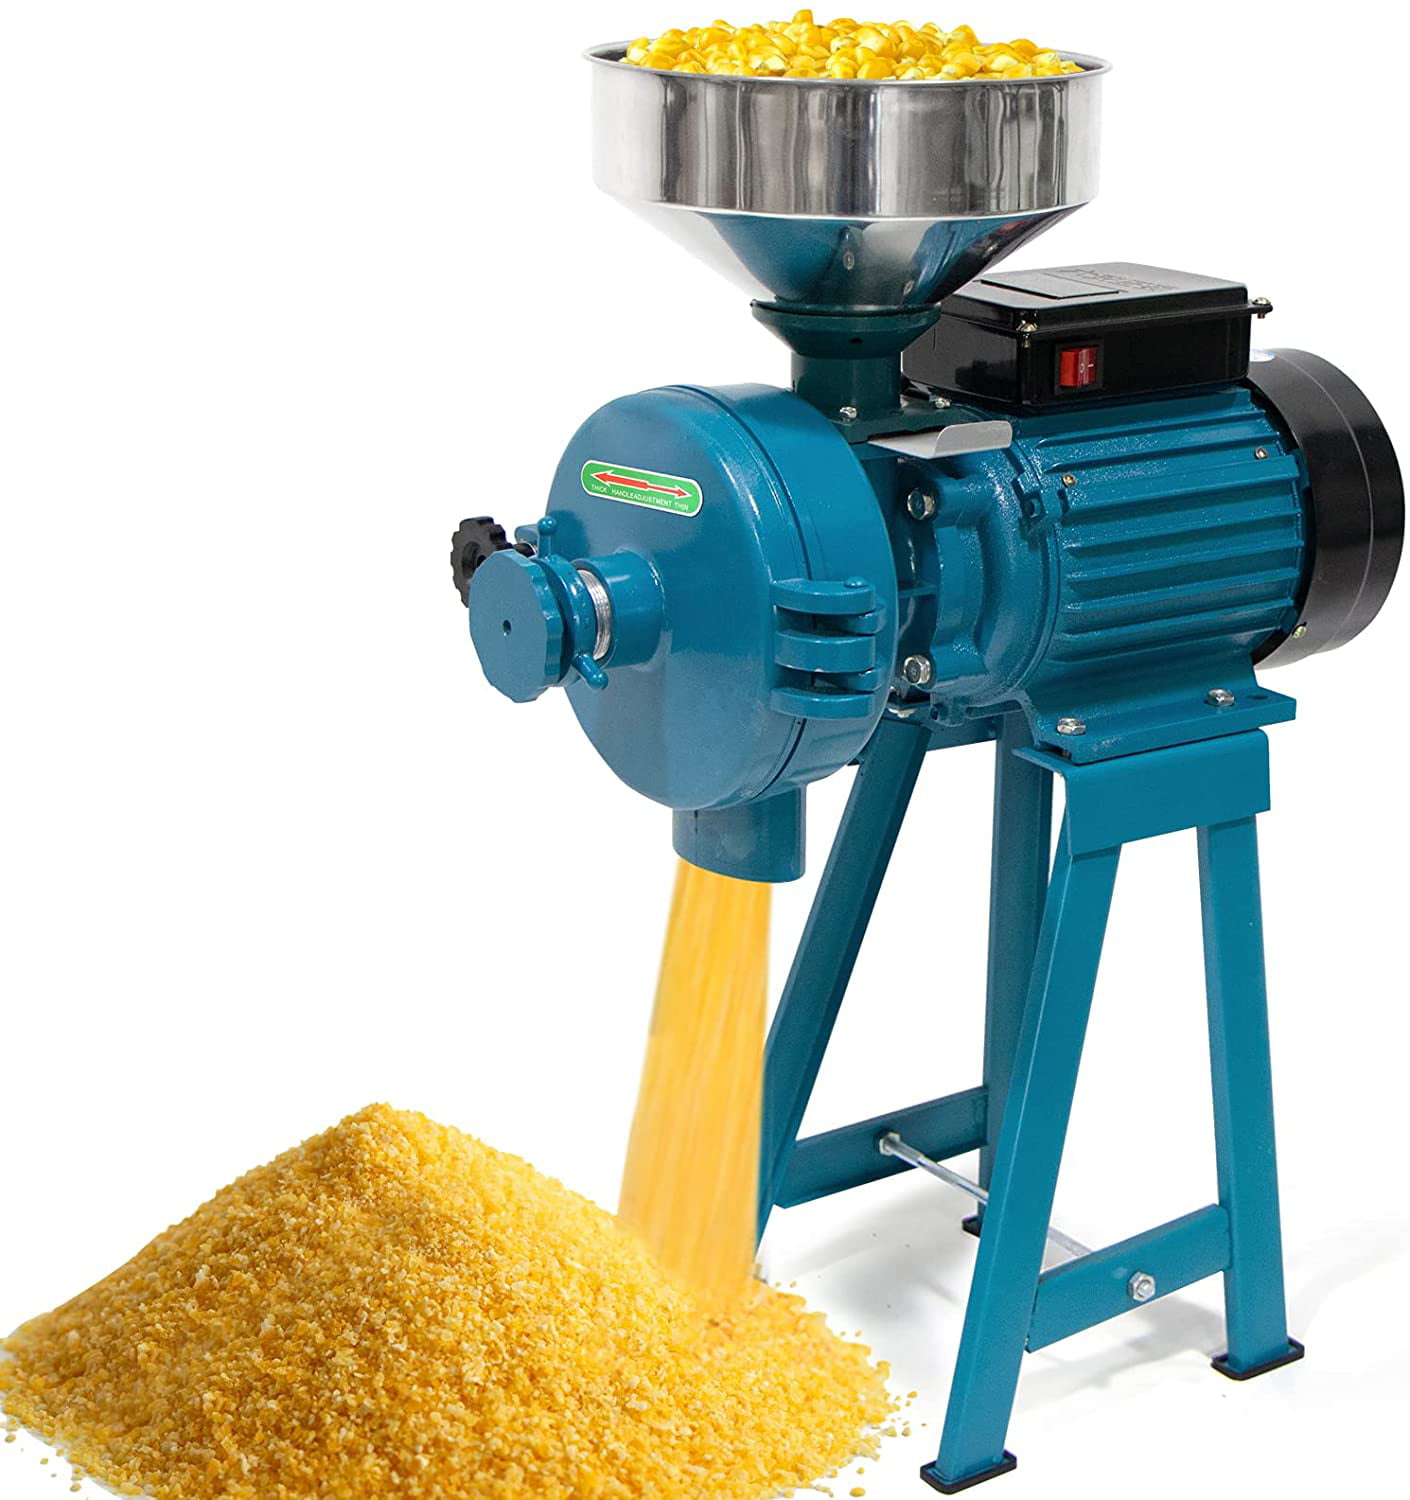 TFCFL Rice Soybean Electric Mill Grinder Upgraded 3000W Heavy Duty Commercial Dry Feed Mill Grinder 110V Cereals Corn Grain Coffee Wheat Feed Machine with Funnel Blue 